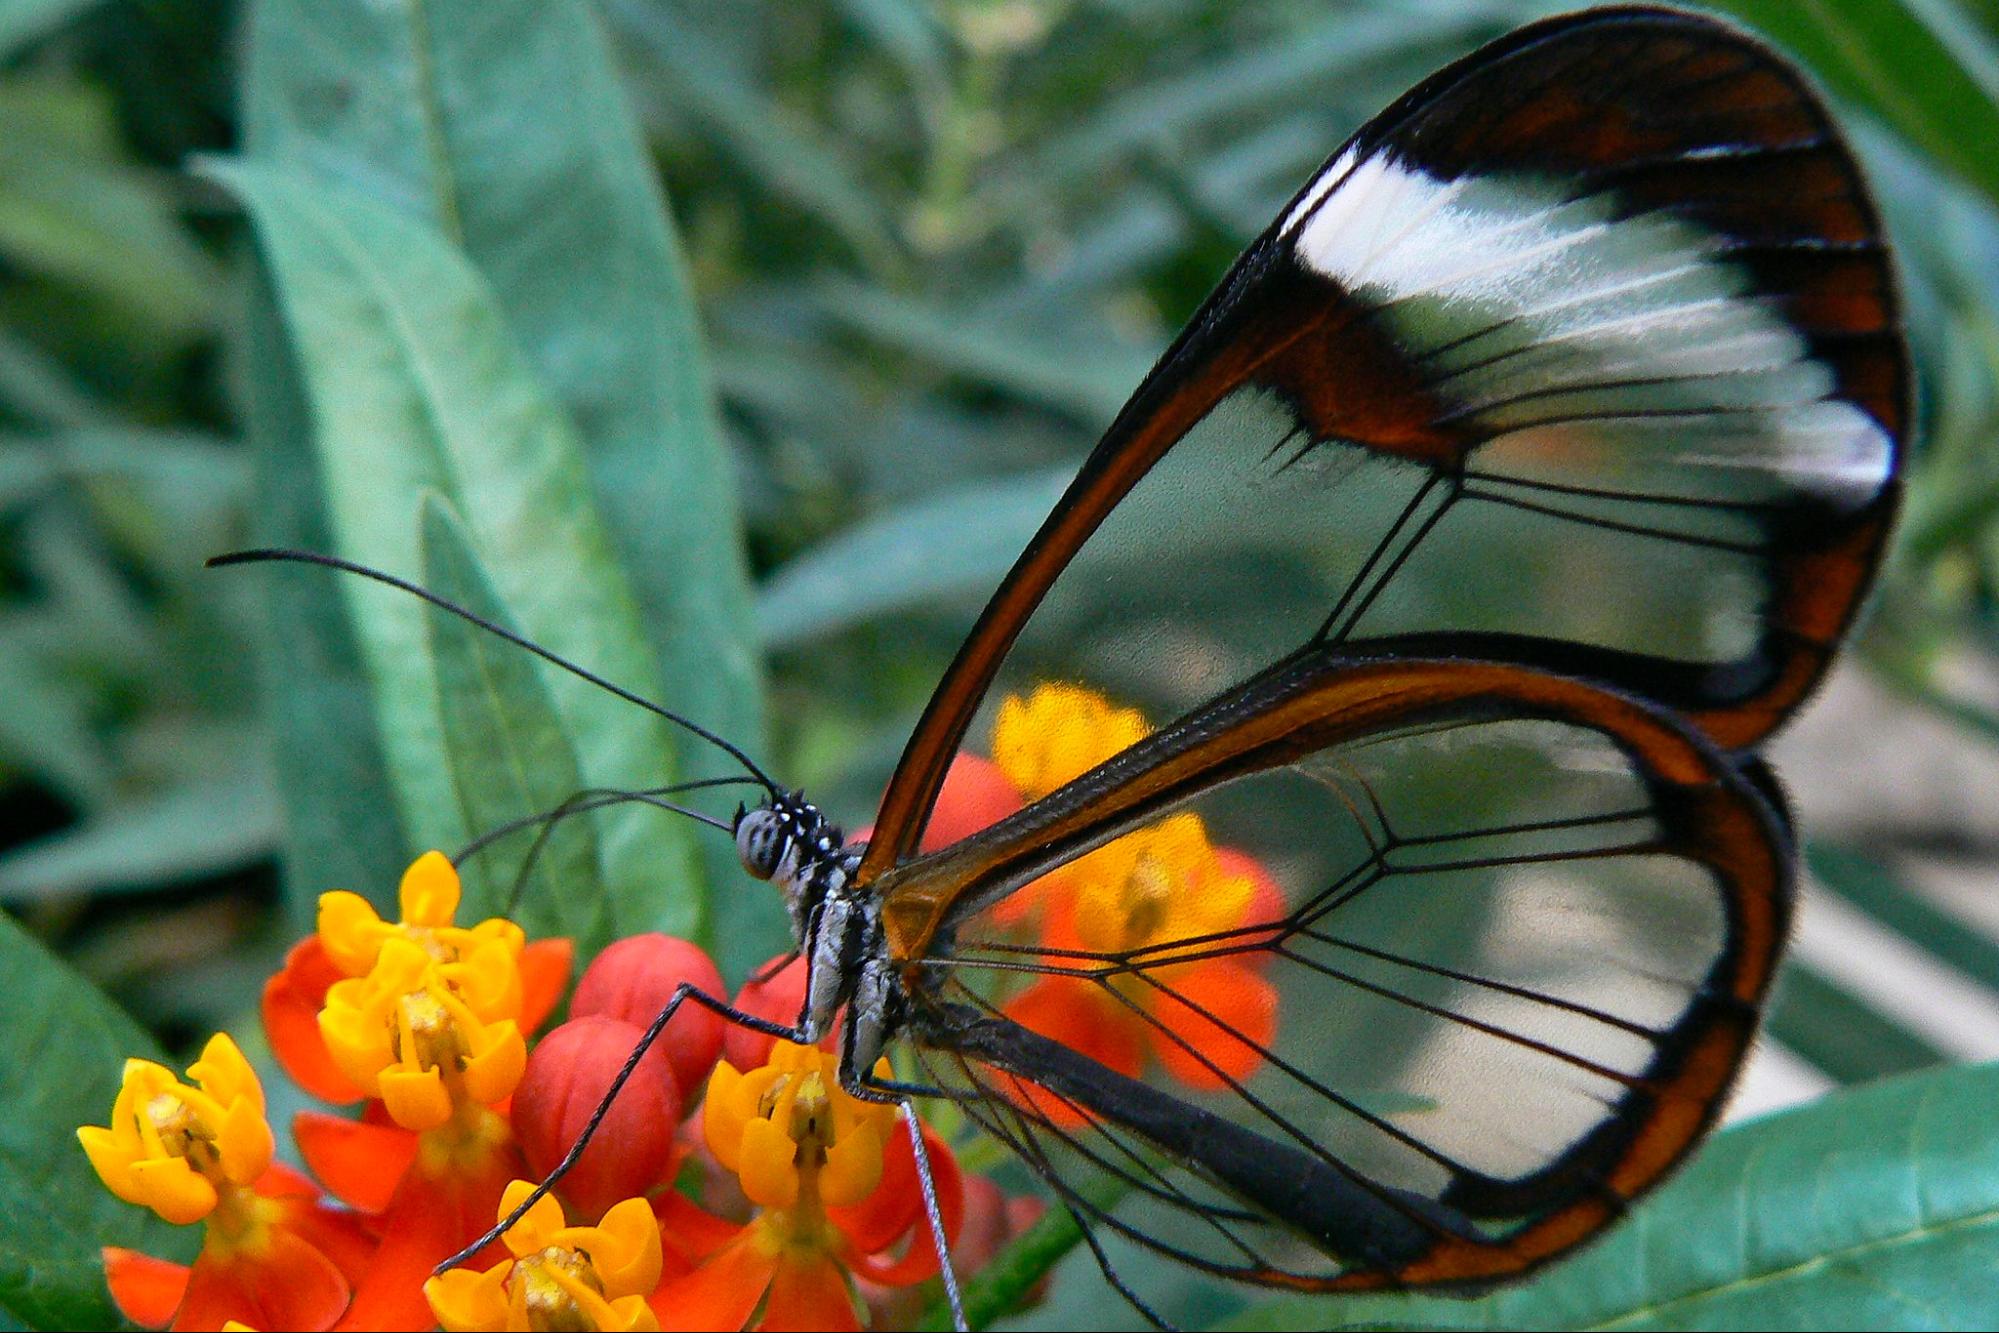 Insect Wingbeats Will Help Quantify Biodiversity, Researchers Say